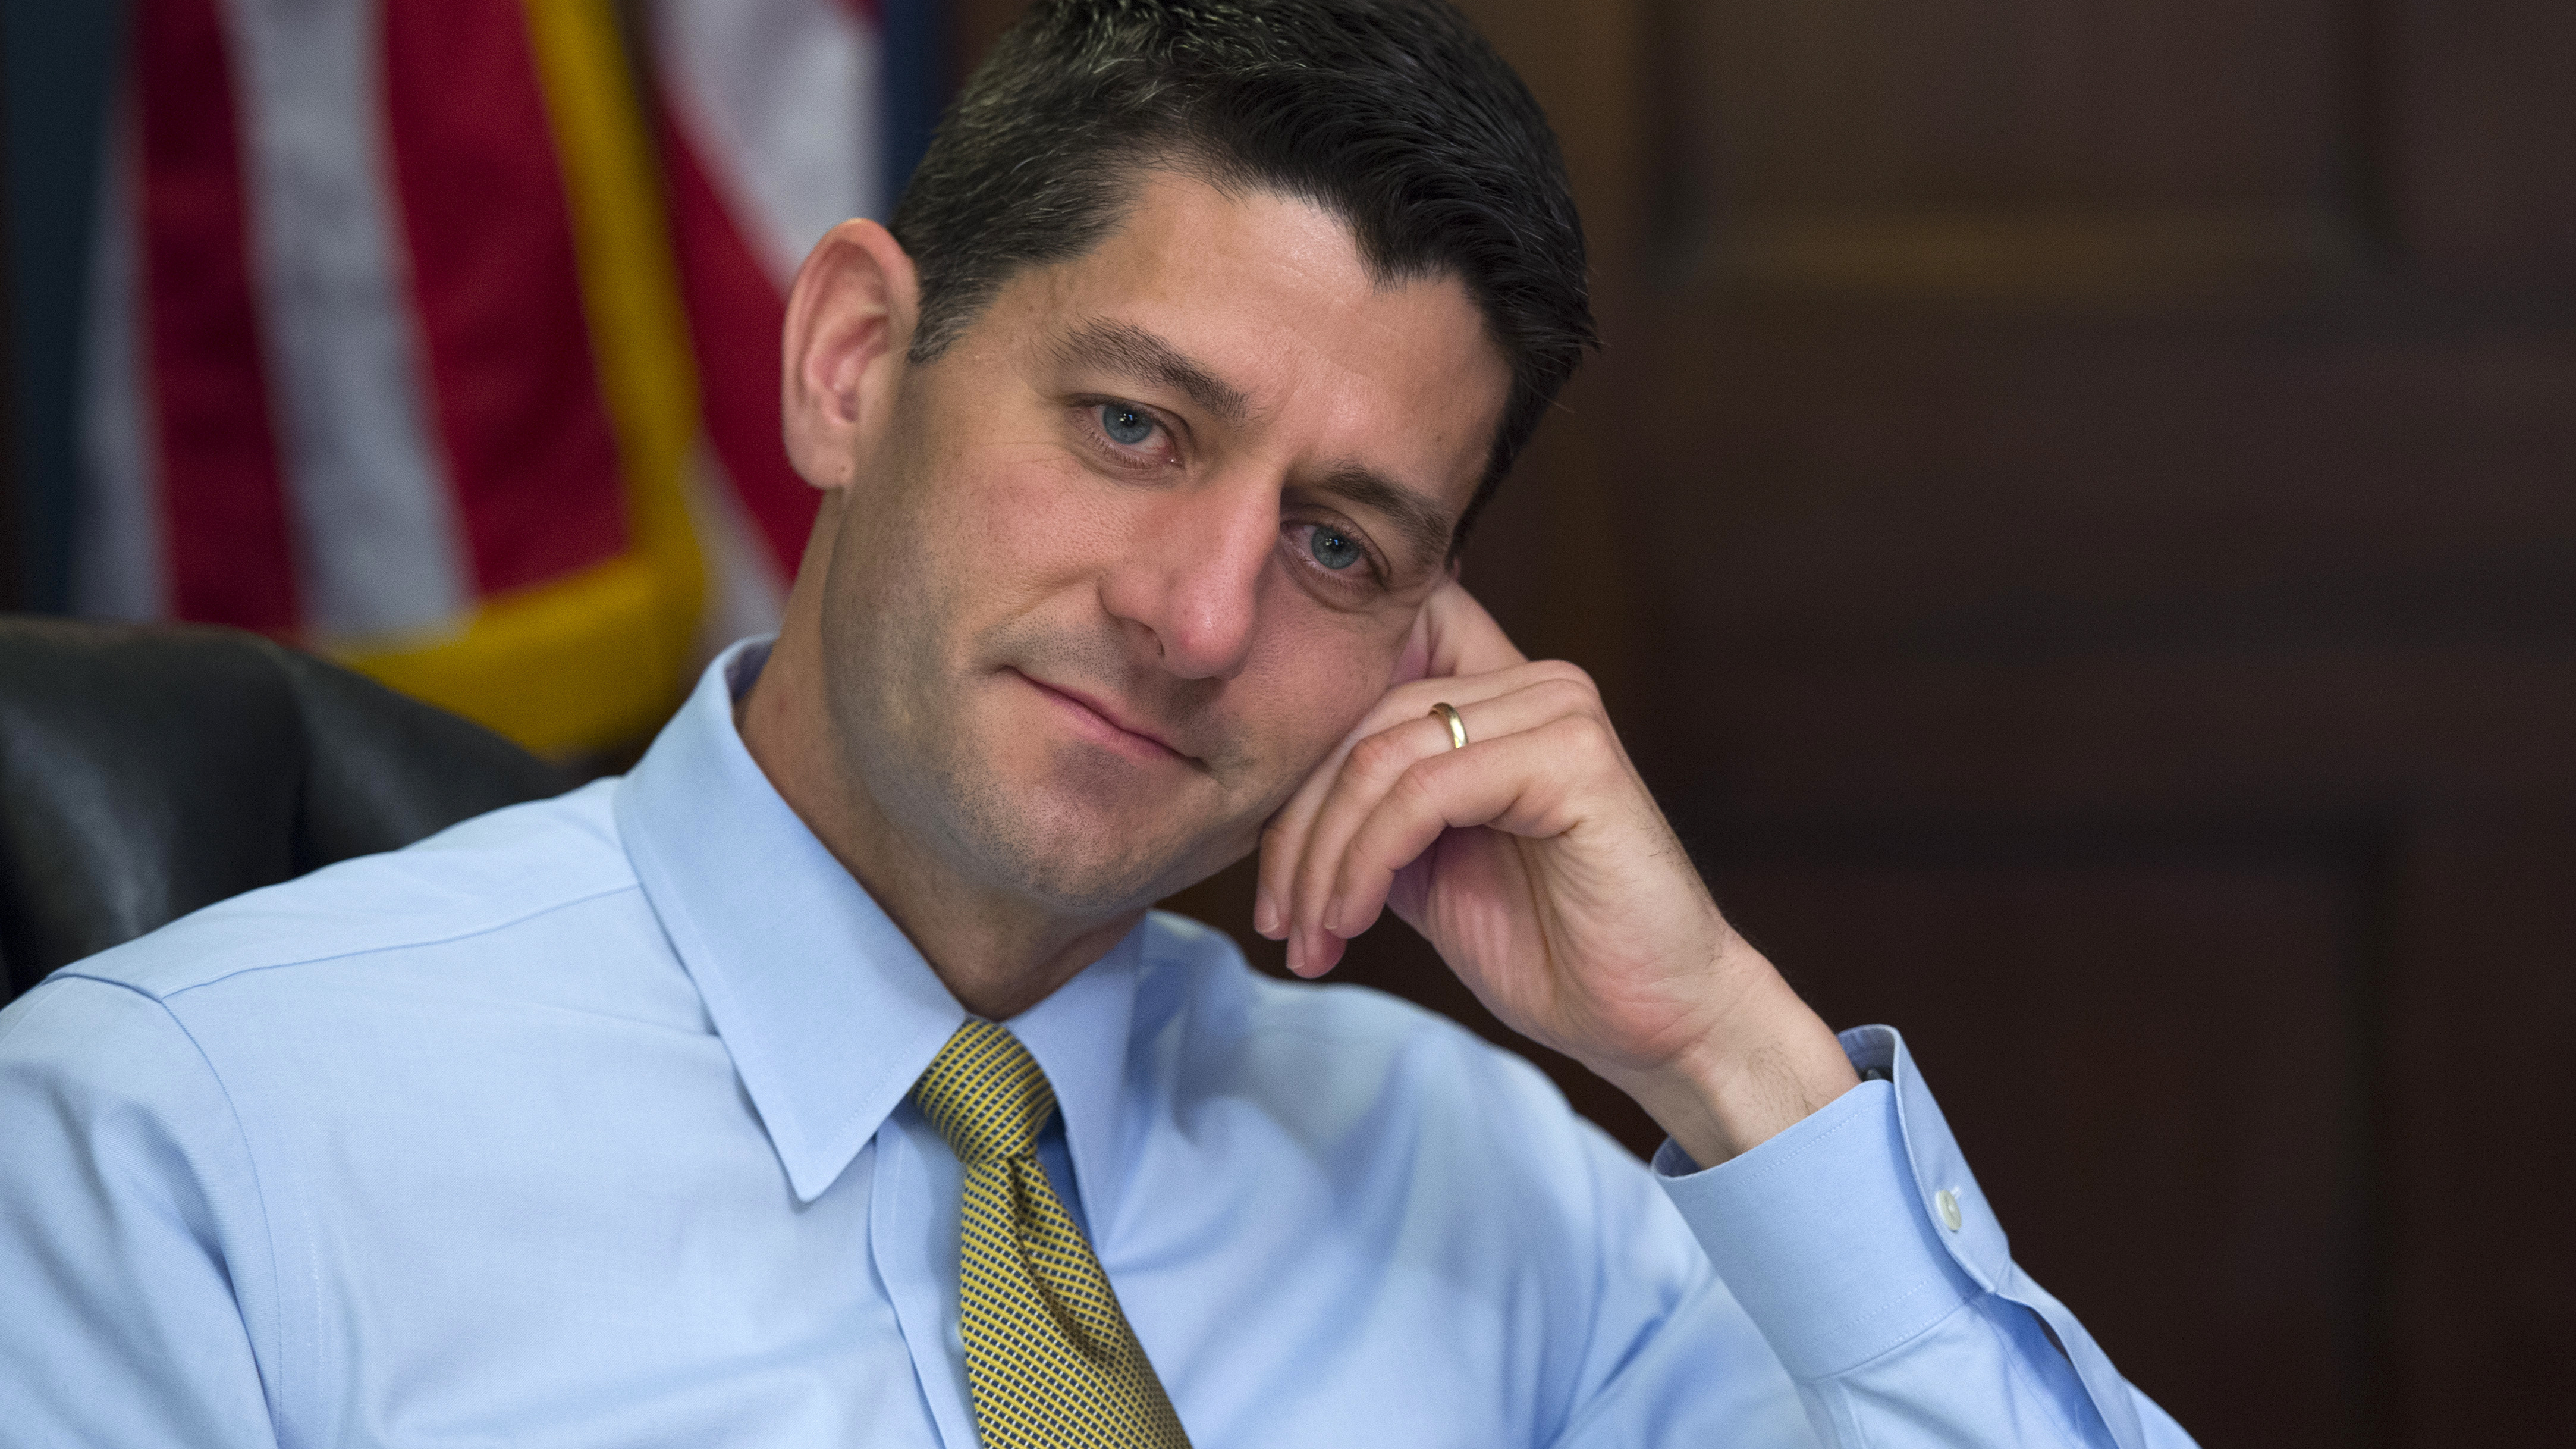 The pressure on Rep. Paul Ryan to run for speaker is mounting, even though he has said repeatedly he doesn't want the job. (Photo by Molly Riley/AP)